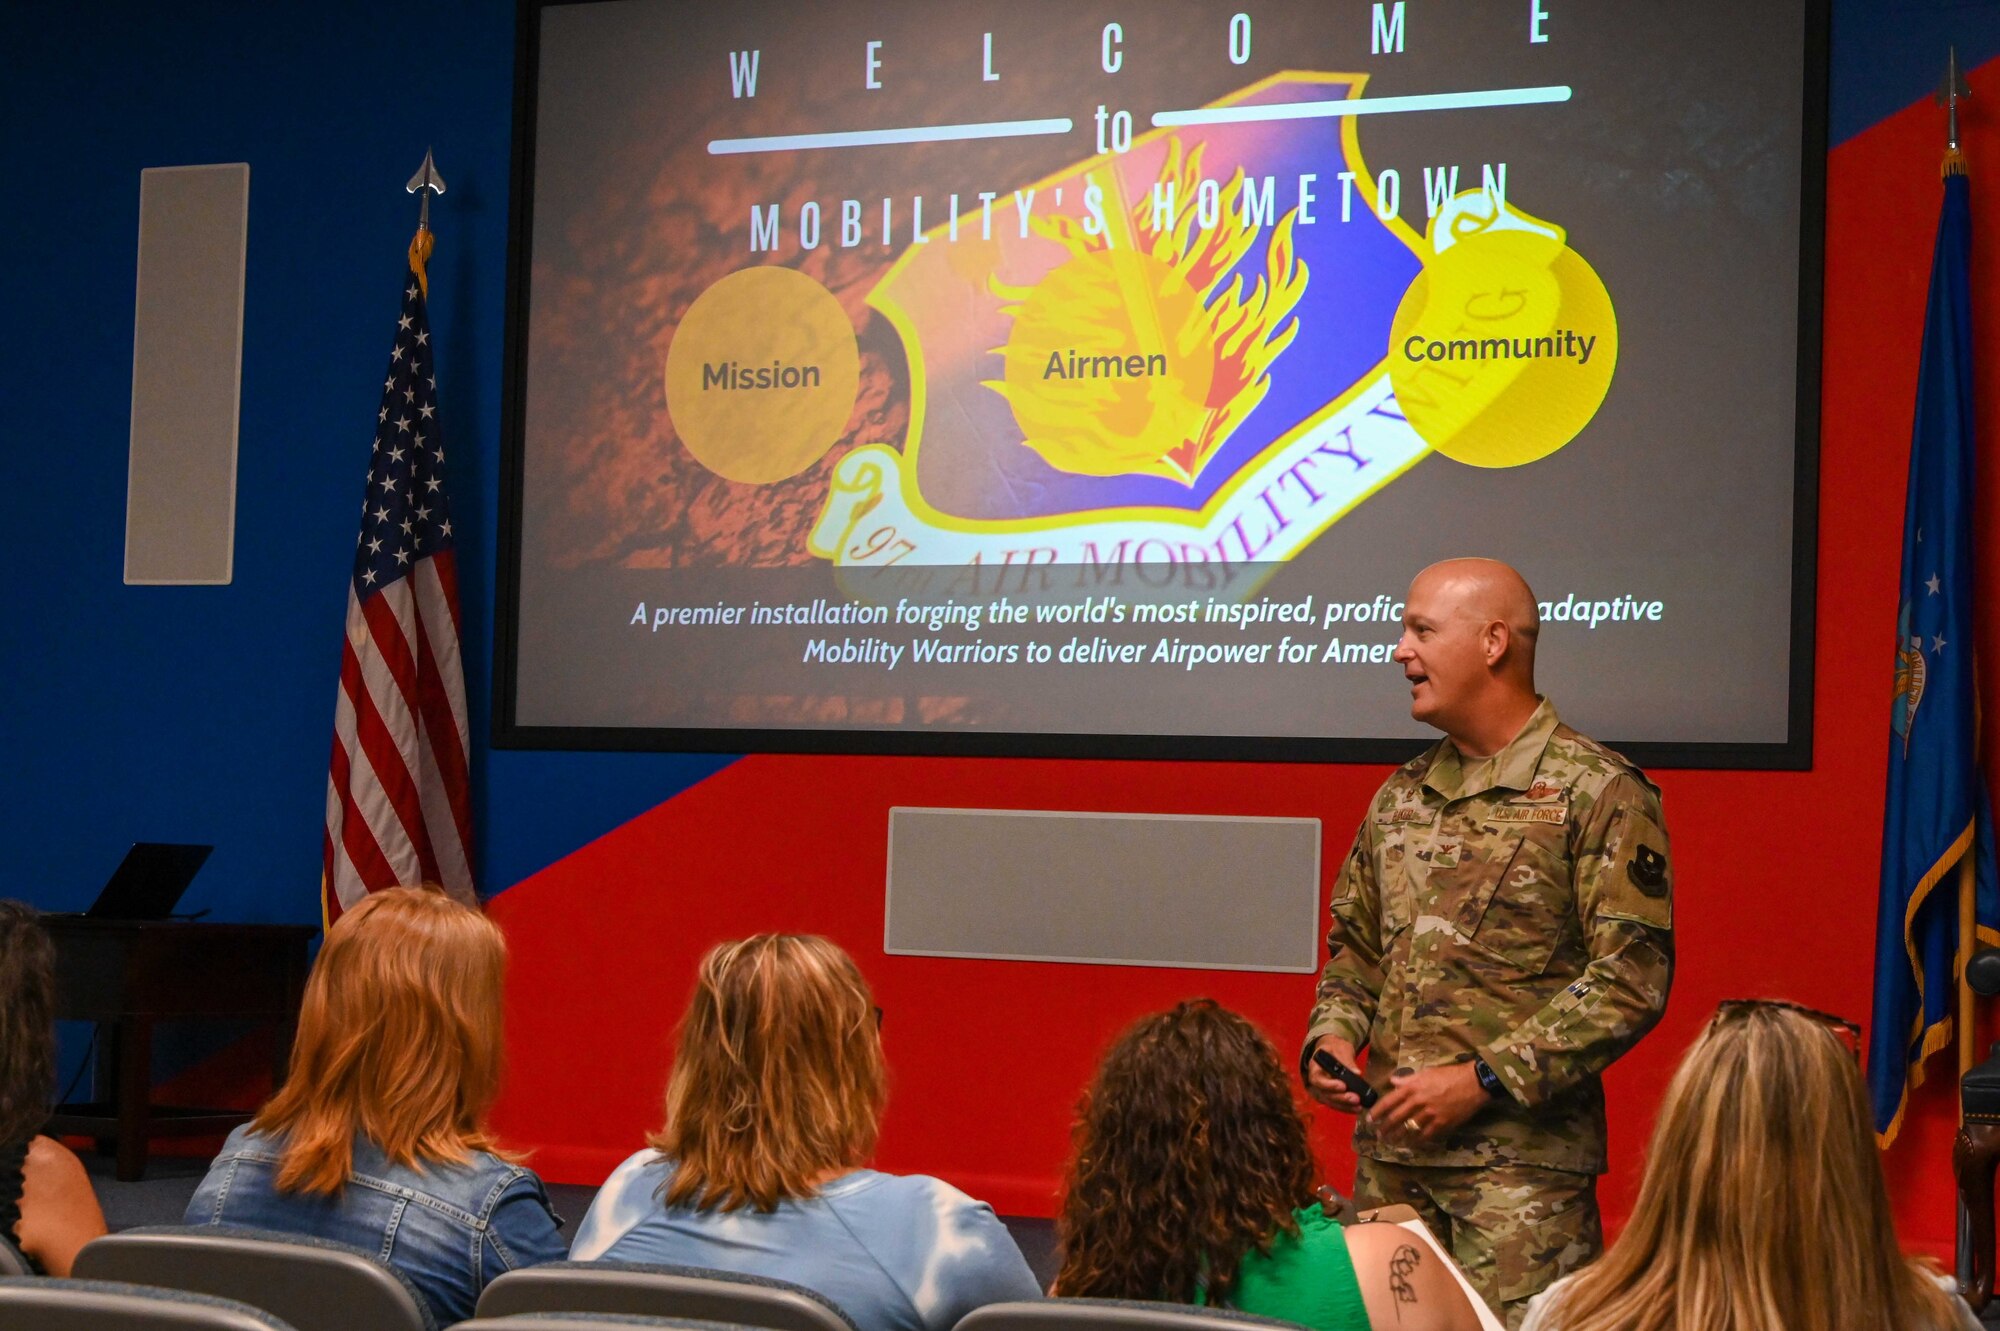 U.S. Air Force Col. Blaine Baker, 97th Air Mobility Wing commander, talks with local teachers during a tour at Altus Air Force Base (AAFB), Oklahoma, Aug. 2, 2022. Baker spoke about AAFB’s mission, Airmen and community partnership within Altus. (U.S. Air Force photo Senior Airman Kayla Christenson)